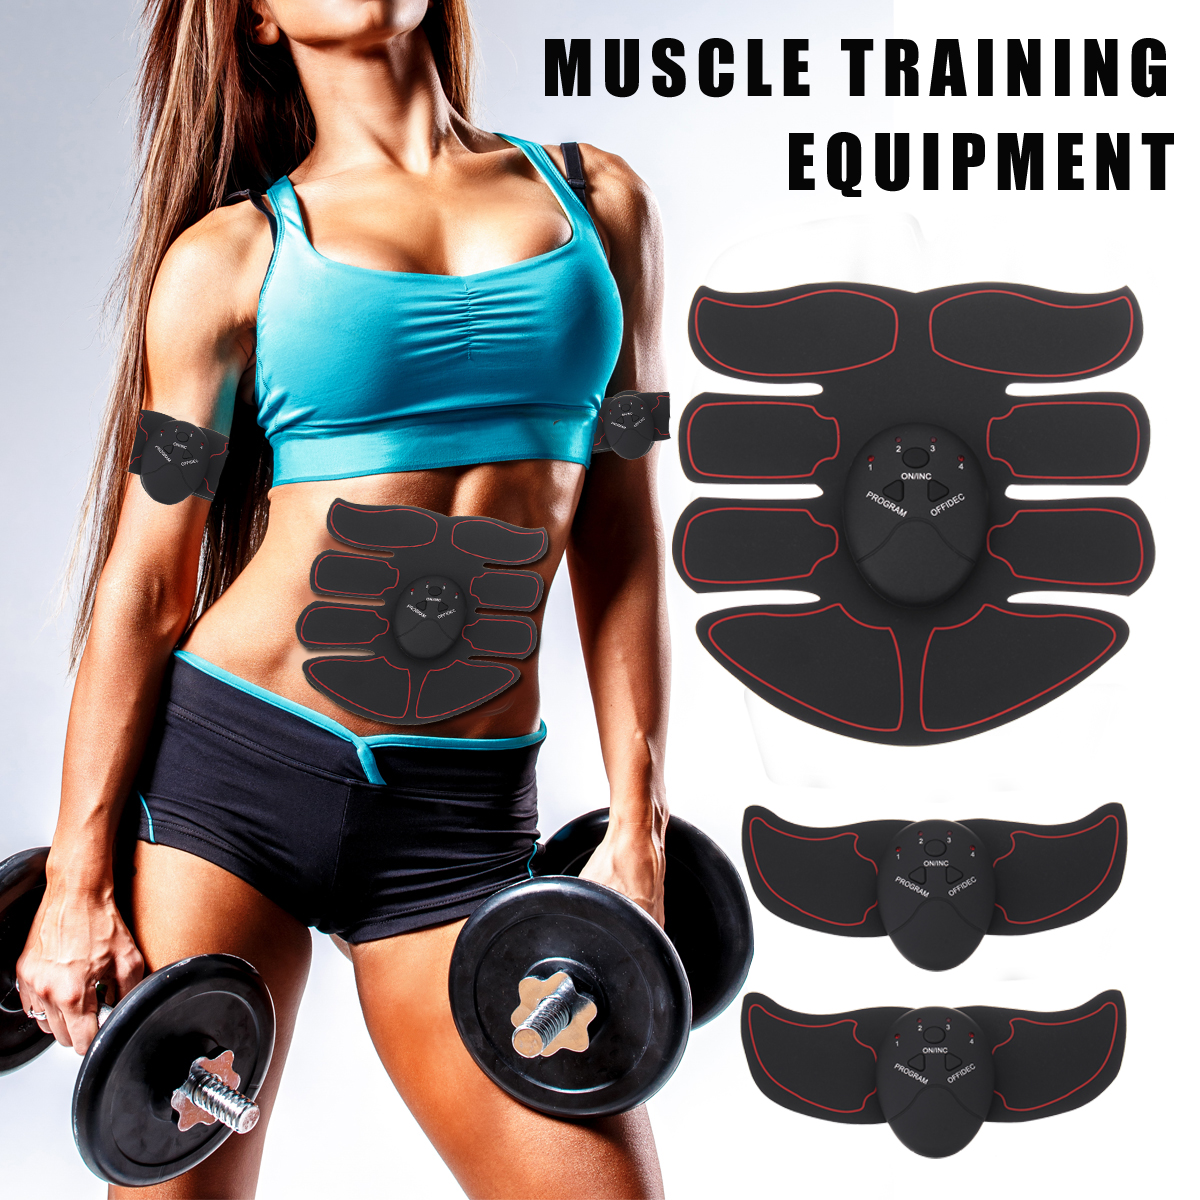 6-Modes-Abdominal-Muscle-Stimulator-Set-ABS-EMS-Trainer-Body-Fitness-USB-Rechargeable-Body-Shaping-E-1711765-1